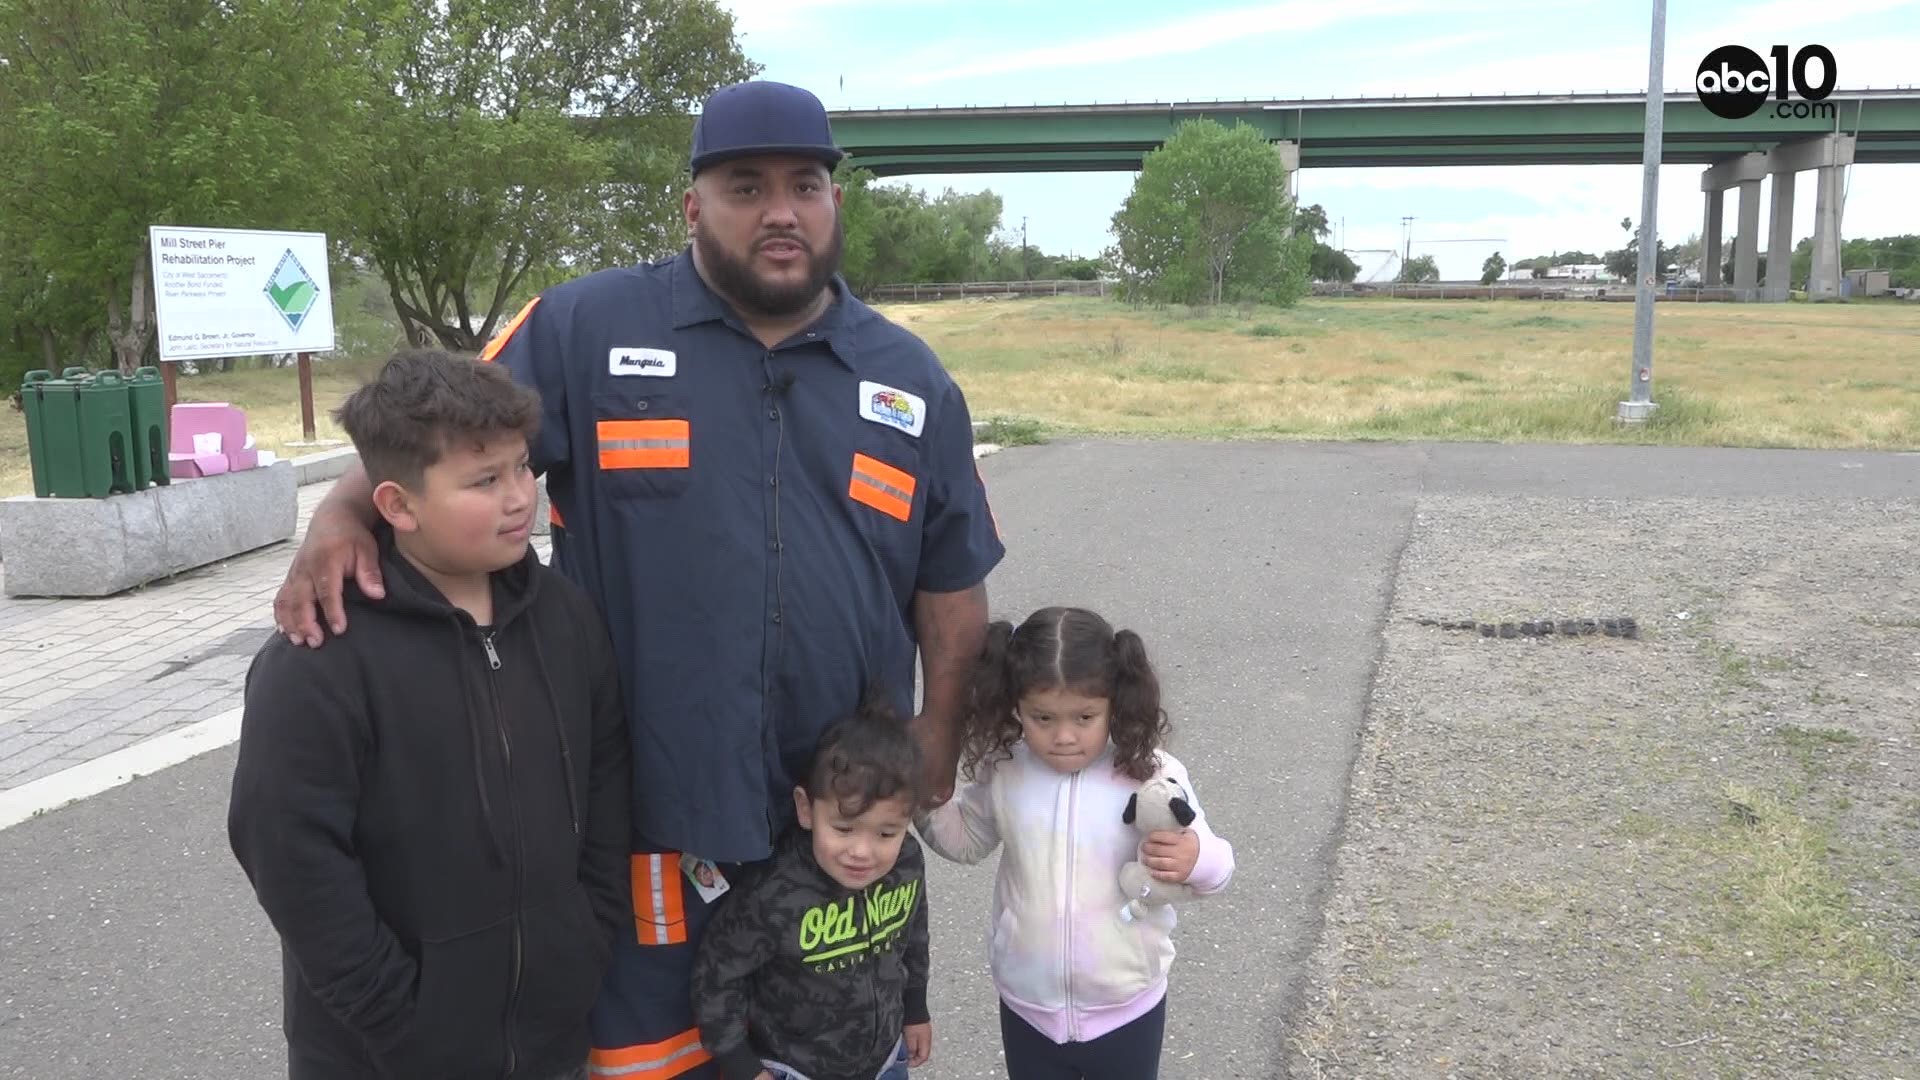 "Every time you see a tow truck driver on the road, please move over or slow down," said Gavino Munguia, tow truck driver and father of three. He drove in the processional for Shalvinesh and Roselyn Sharma. The couple died after the tow truck they were driving fell into the Sacramento River last month.